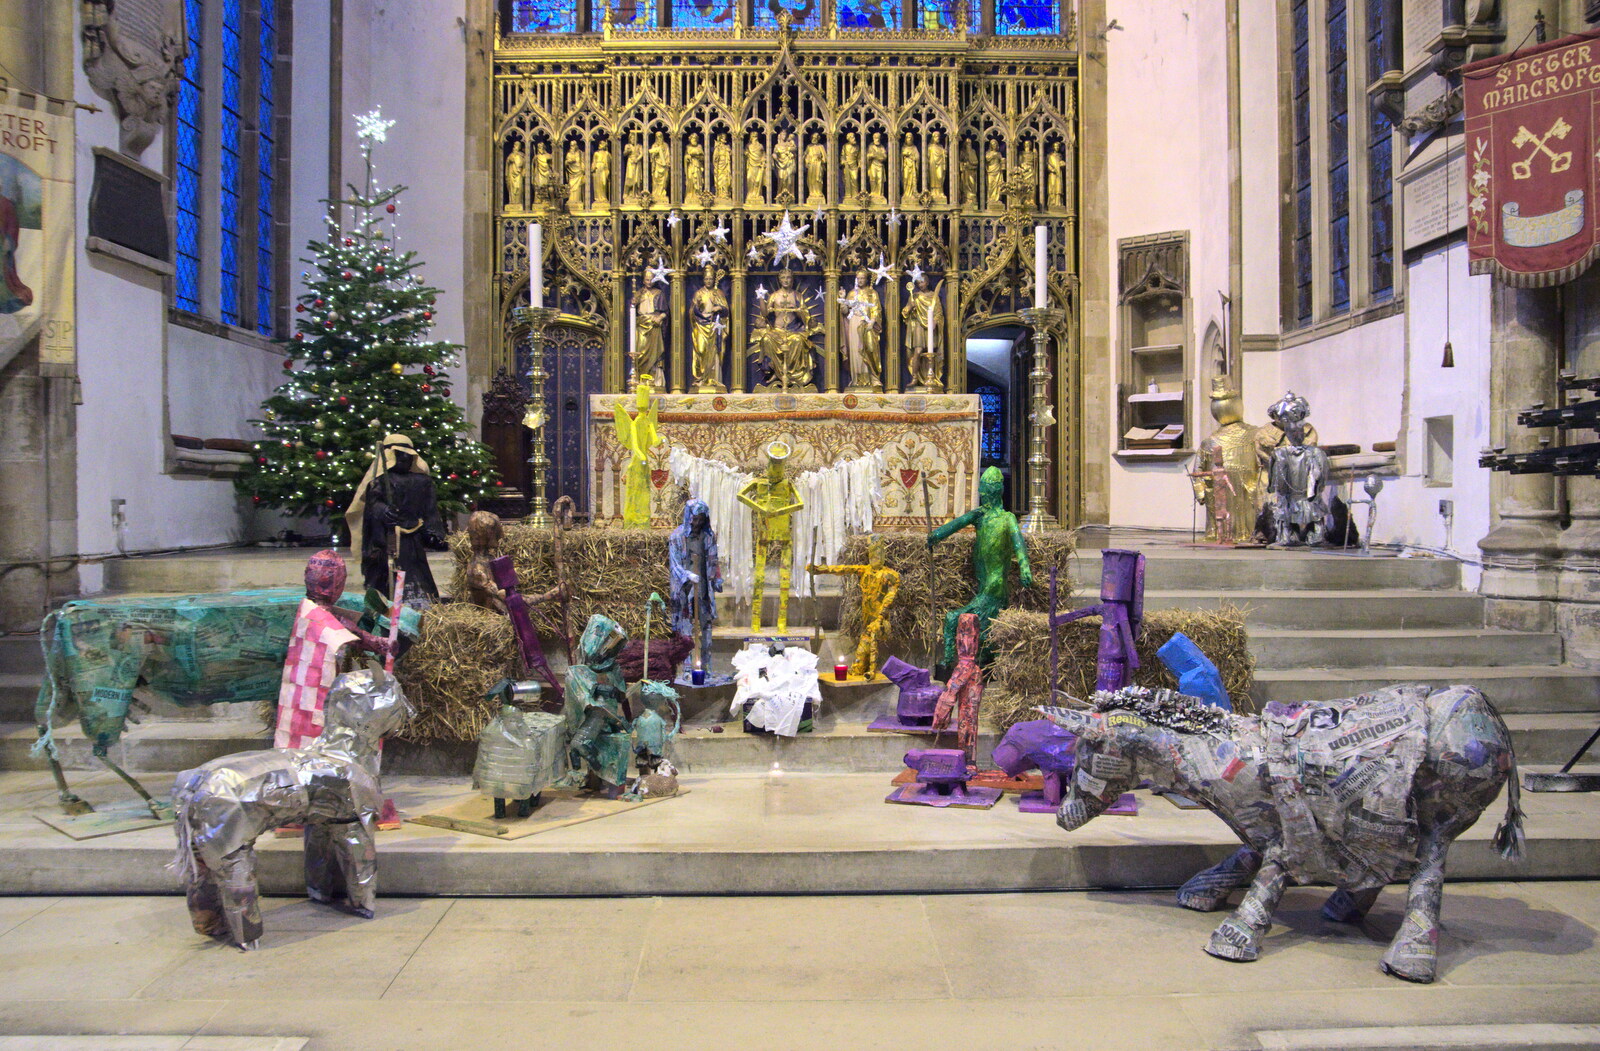 A Nativity display in St. Peter Mancroft from A Bit of Christmas Shopping, Norwich, Norfolk - 23rd December 2020